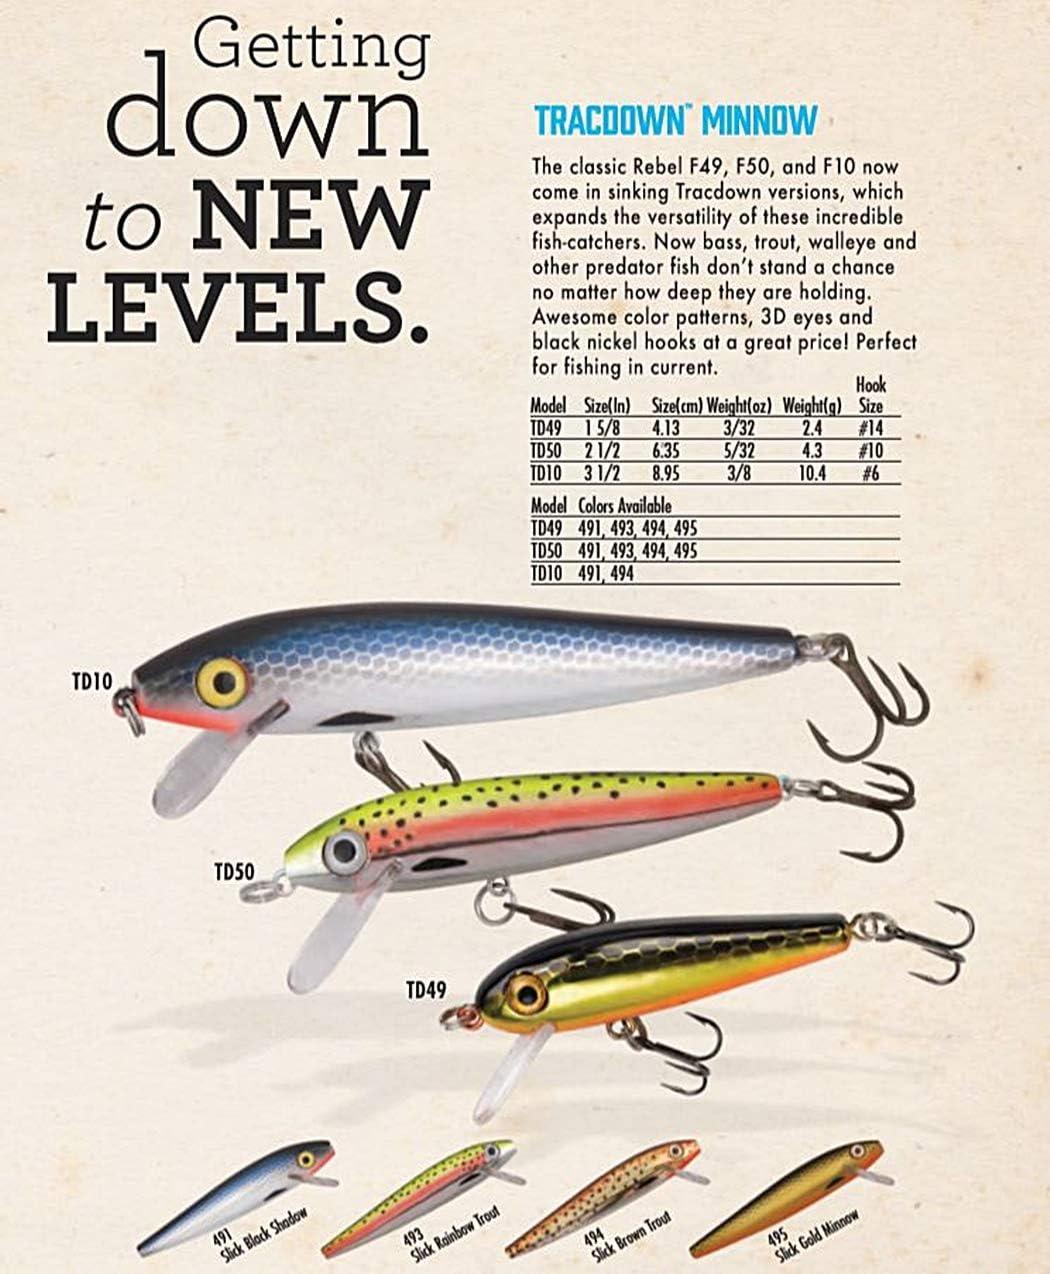 Rebel Lures Tracdown Minnow Slow-Sinking Crankbait Fishing Lure - Great for  Bass, Trout and Walleye Slick Brown Trout 1 5/8 in, 3/32 oz